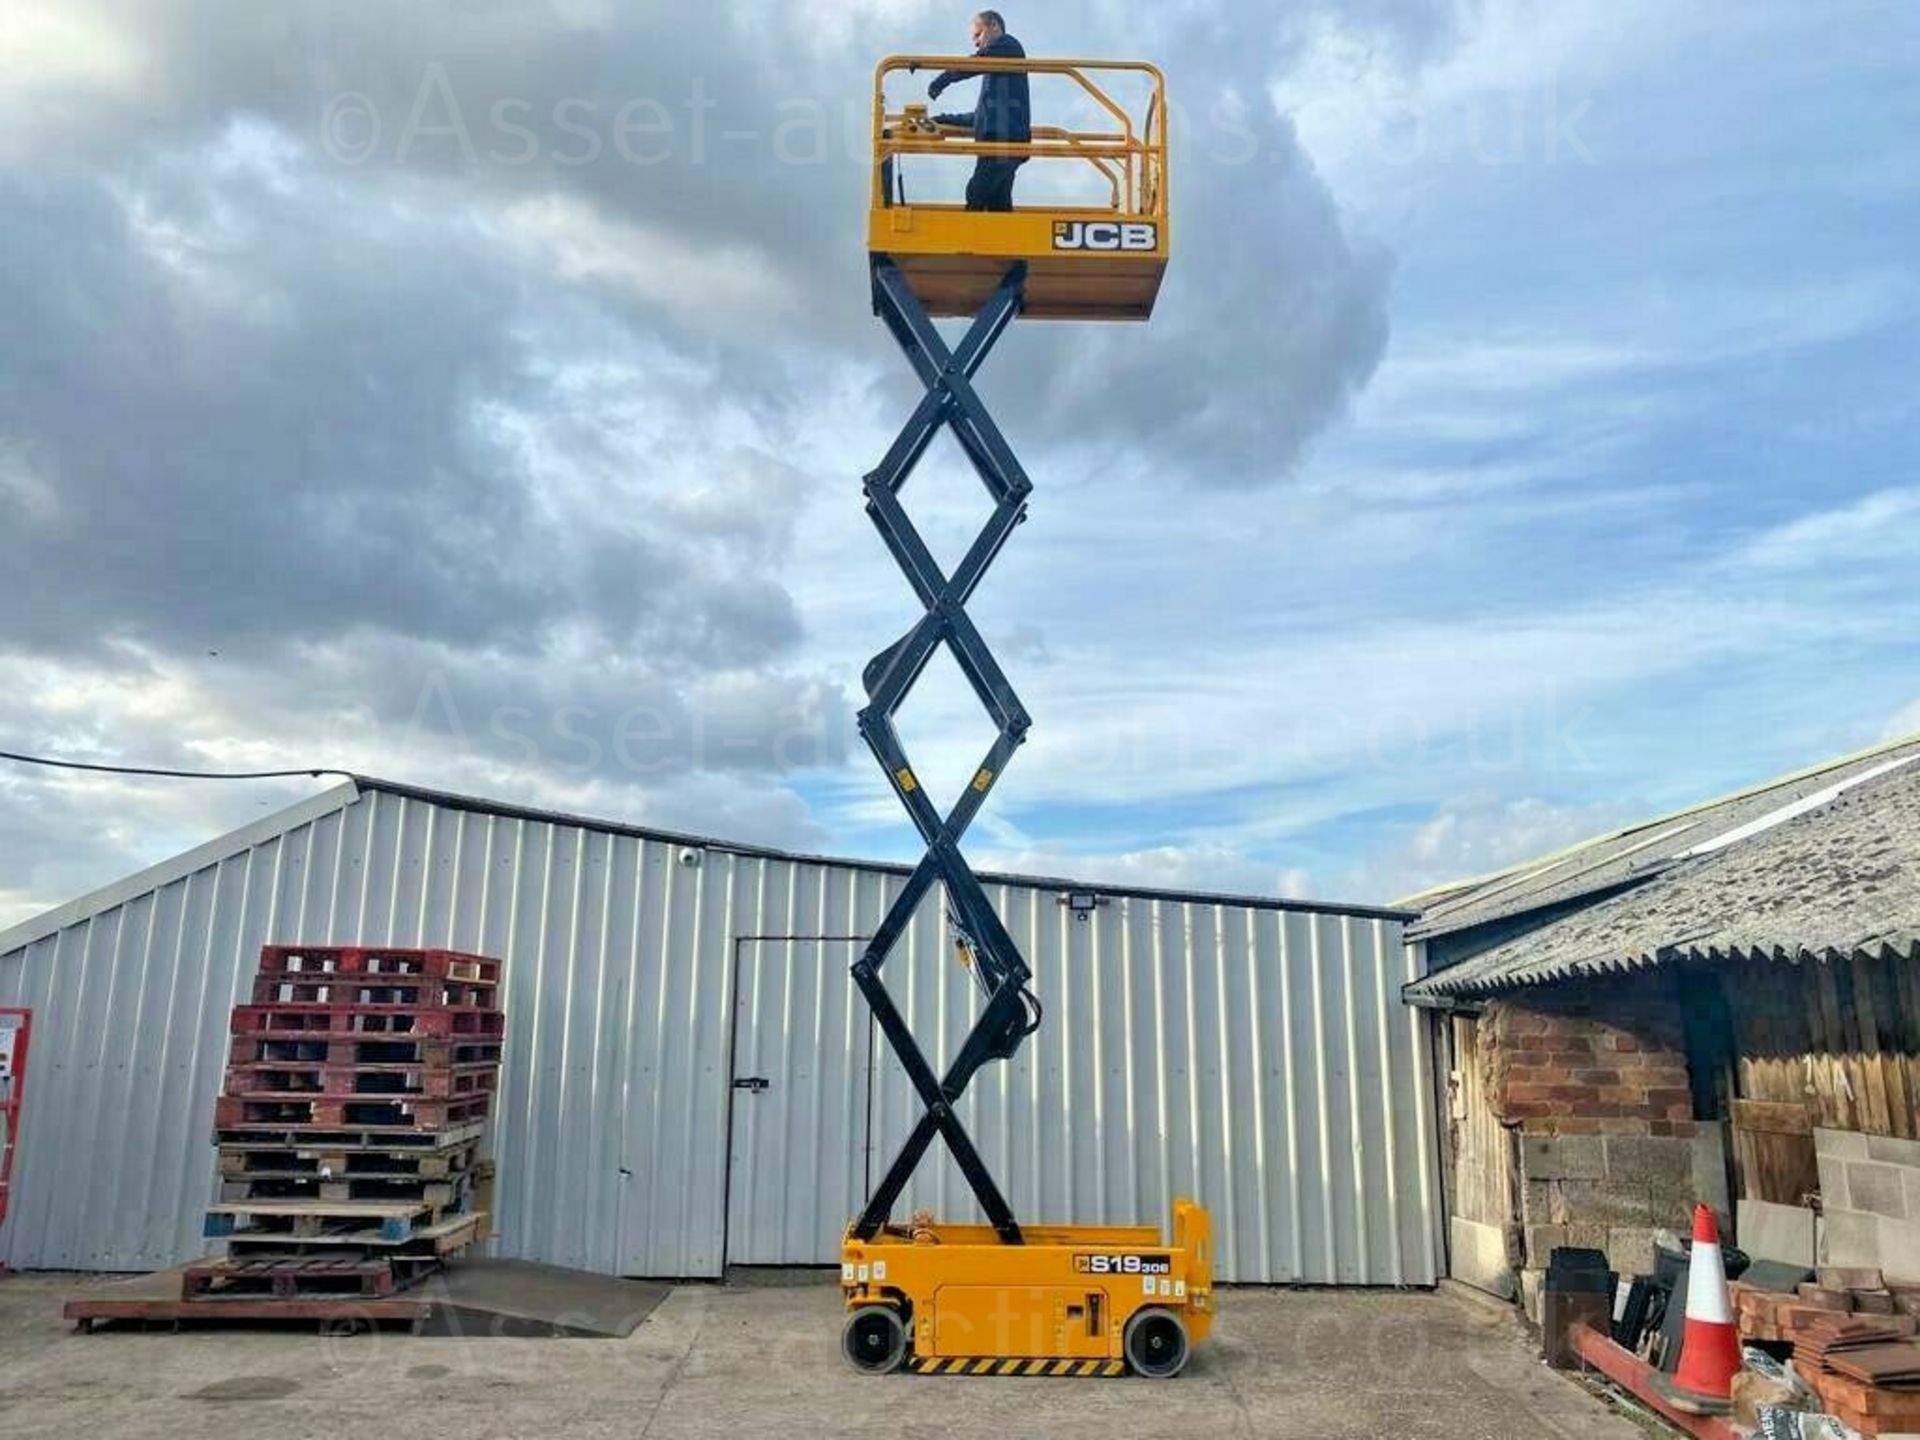 SCISSOR LIFT JCB S1930E ELECTRIC, PLATFORM HEIGHT 5.8m/ 19ft, ONLY 98.4 HOURS, YEAR 2018 *PLUS VAT* - Image 14 of 14